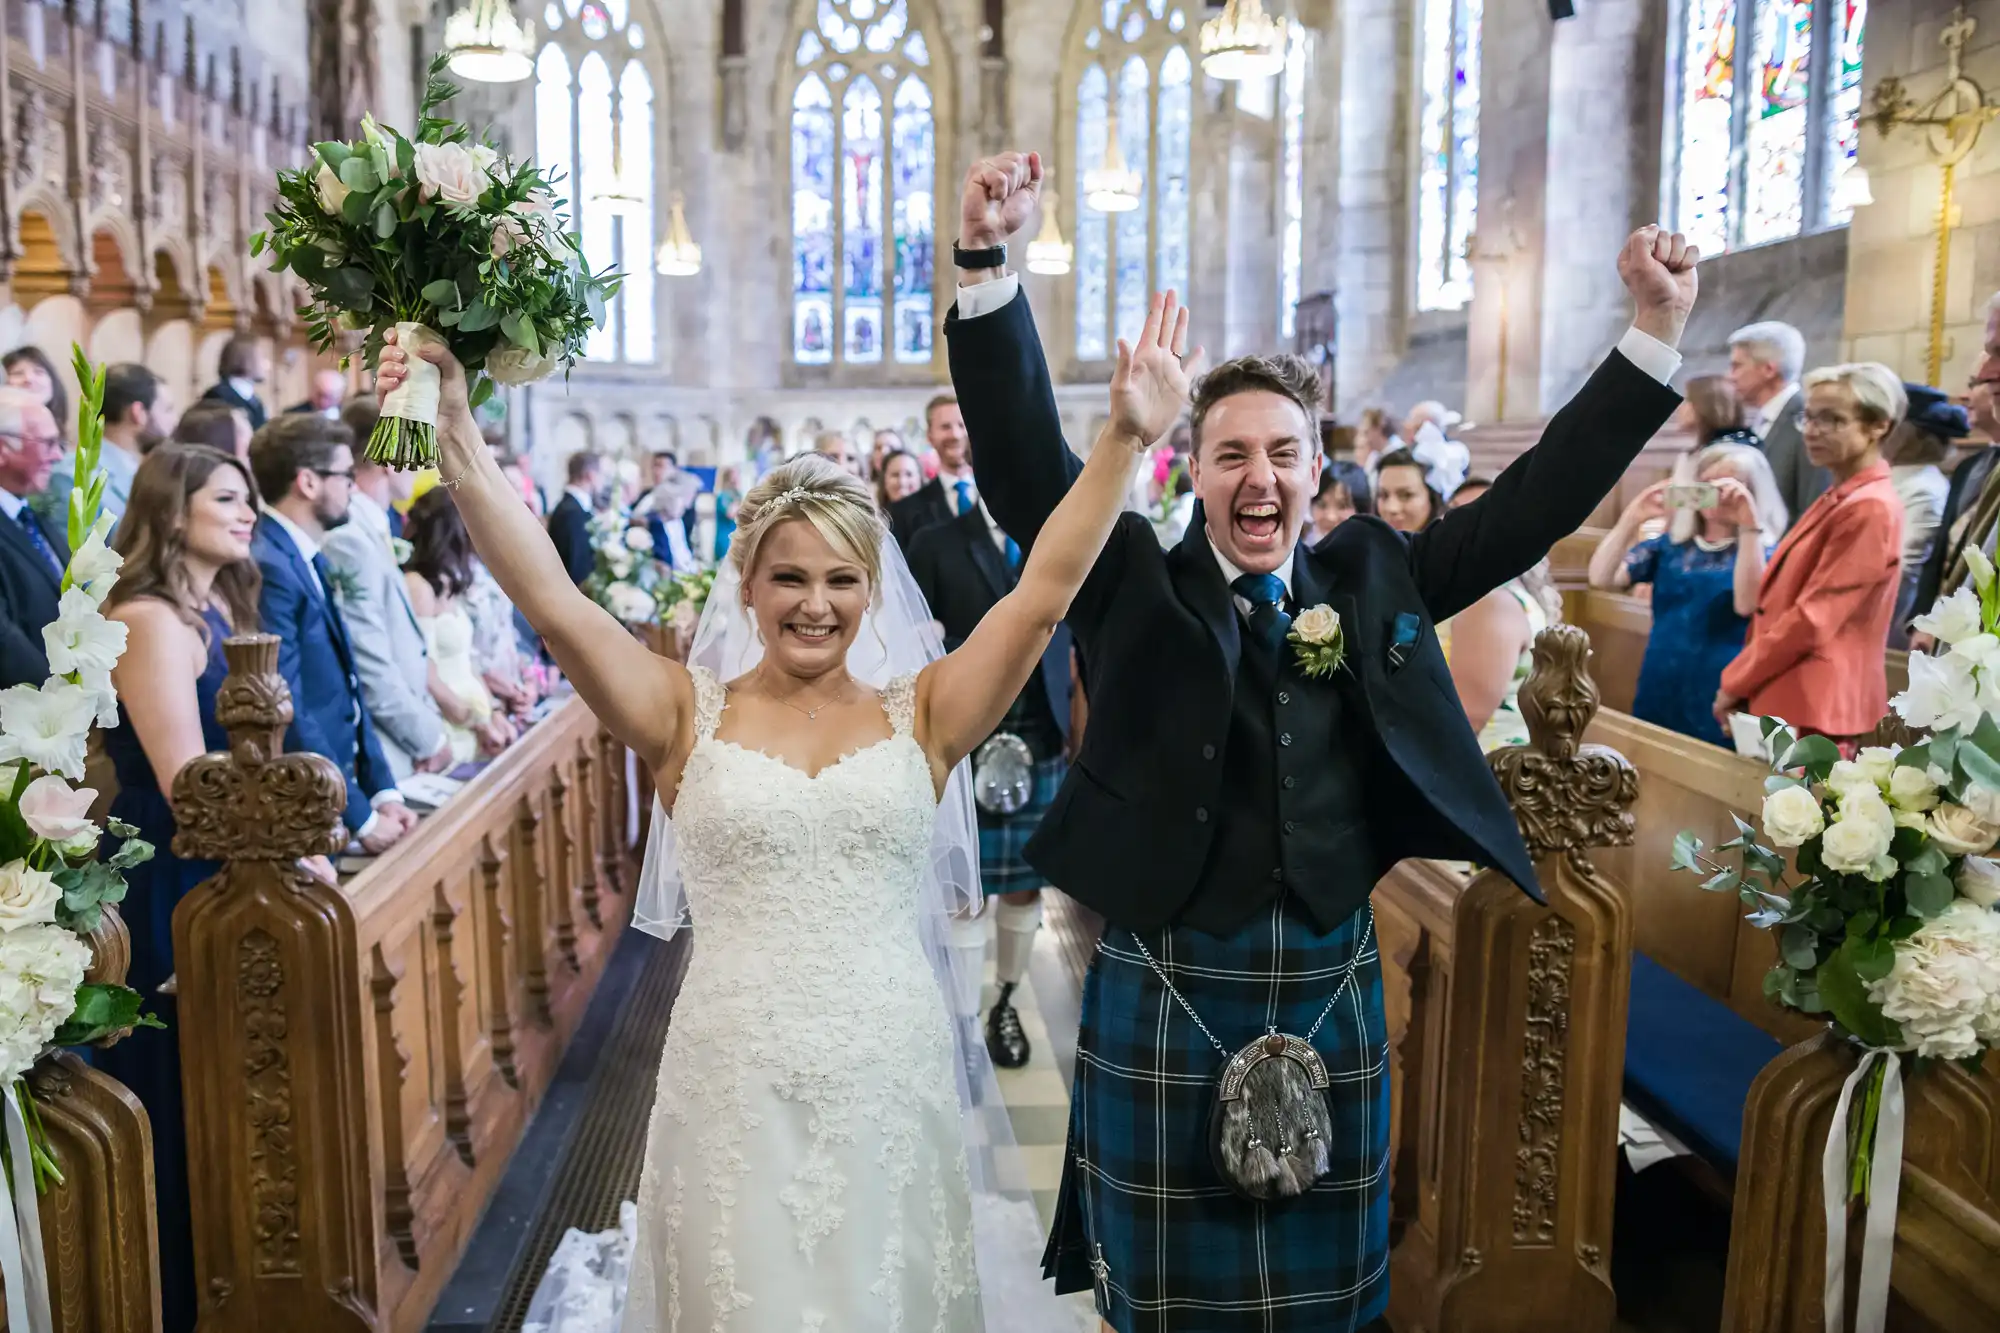 A bride and groom joyfully raise their arms, walking down the aisle of a packed church, as guests look on and cheer. The groom is dressed in a traditional Scottish kilt.